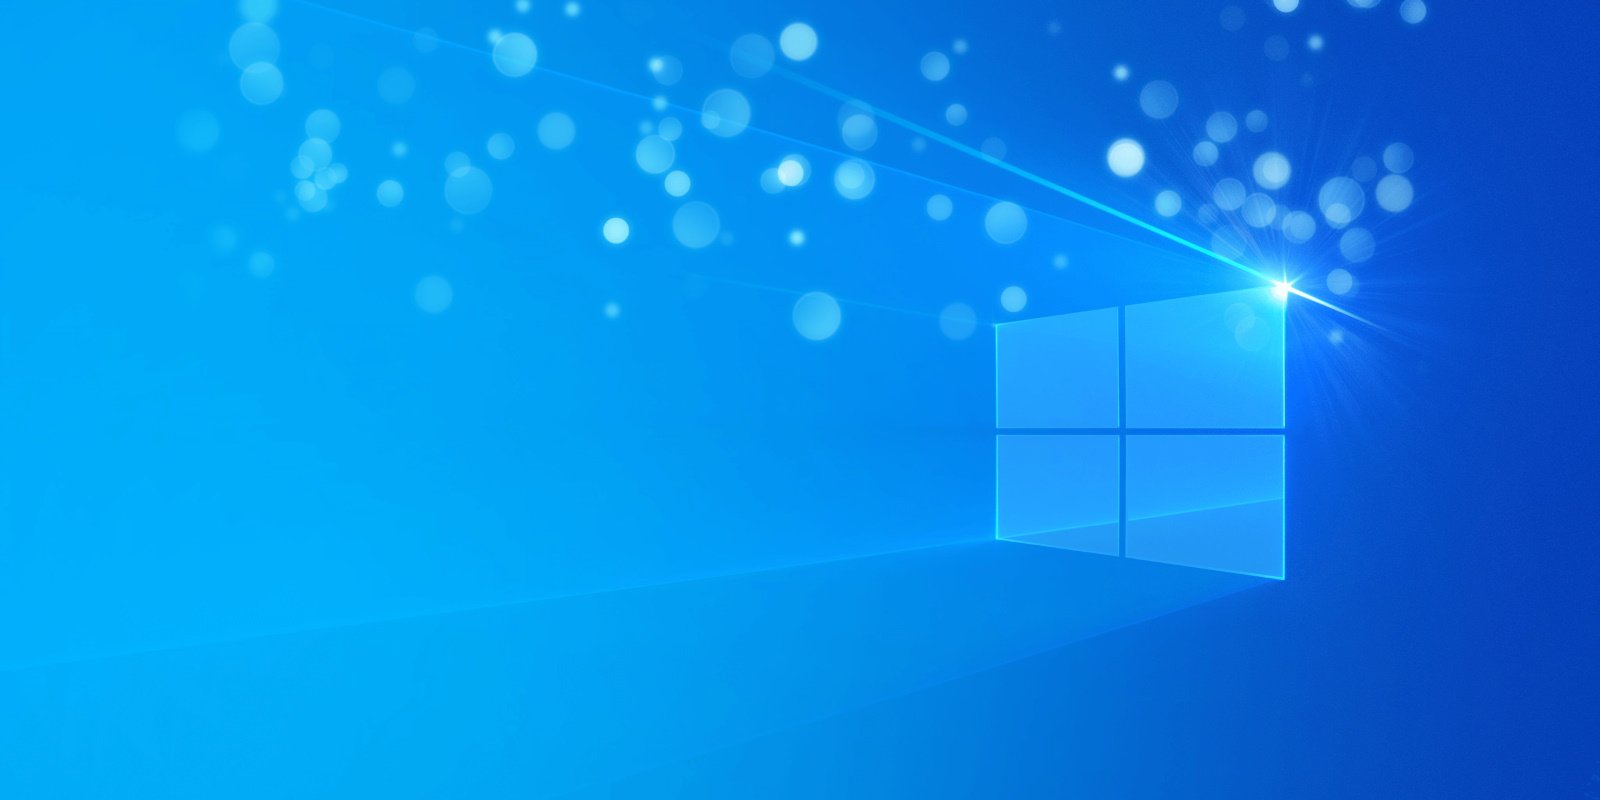 Windows 10 Sun Valley: Everything you need to know